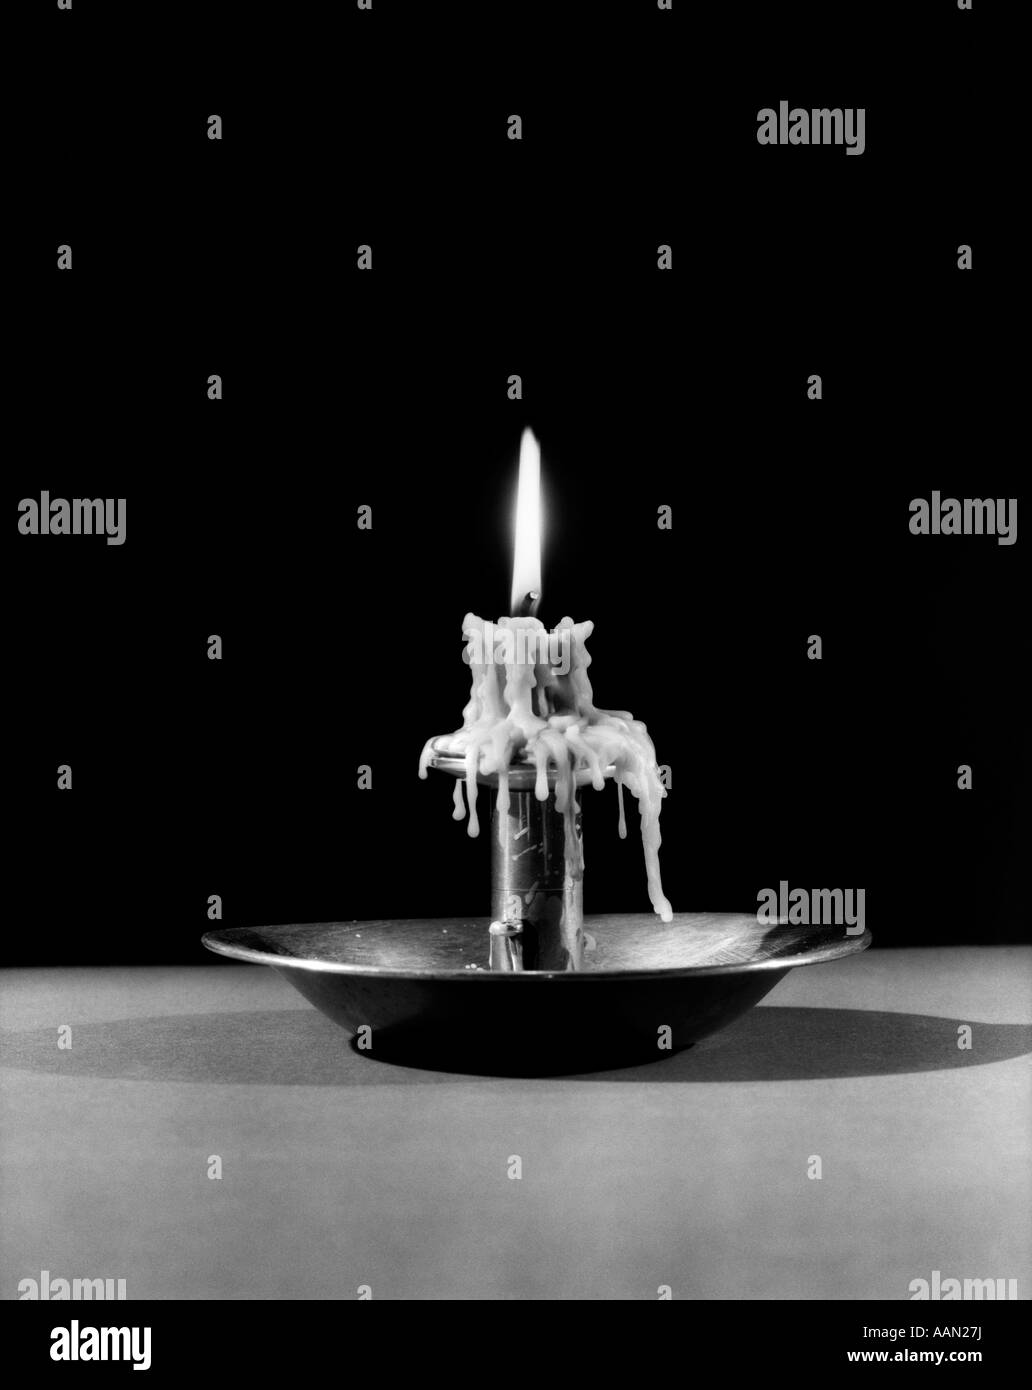 STILL LIFE OF LIT CANDLE BURNED ALMOST ALL THE WAY DOWN DRIPPING WAX Stock Photo